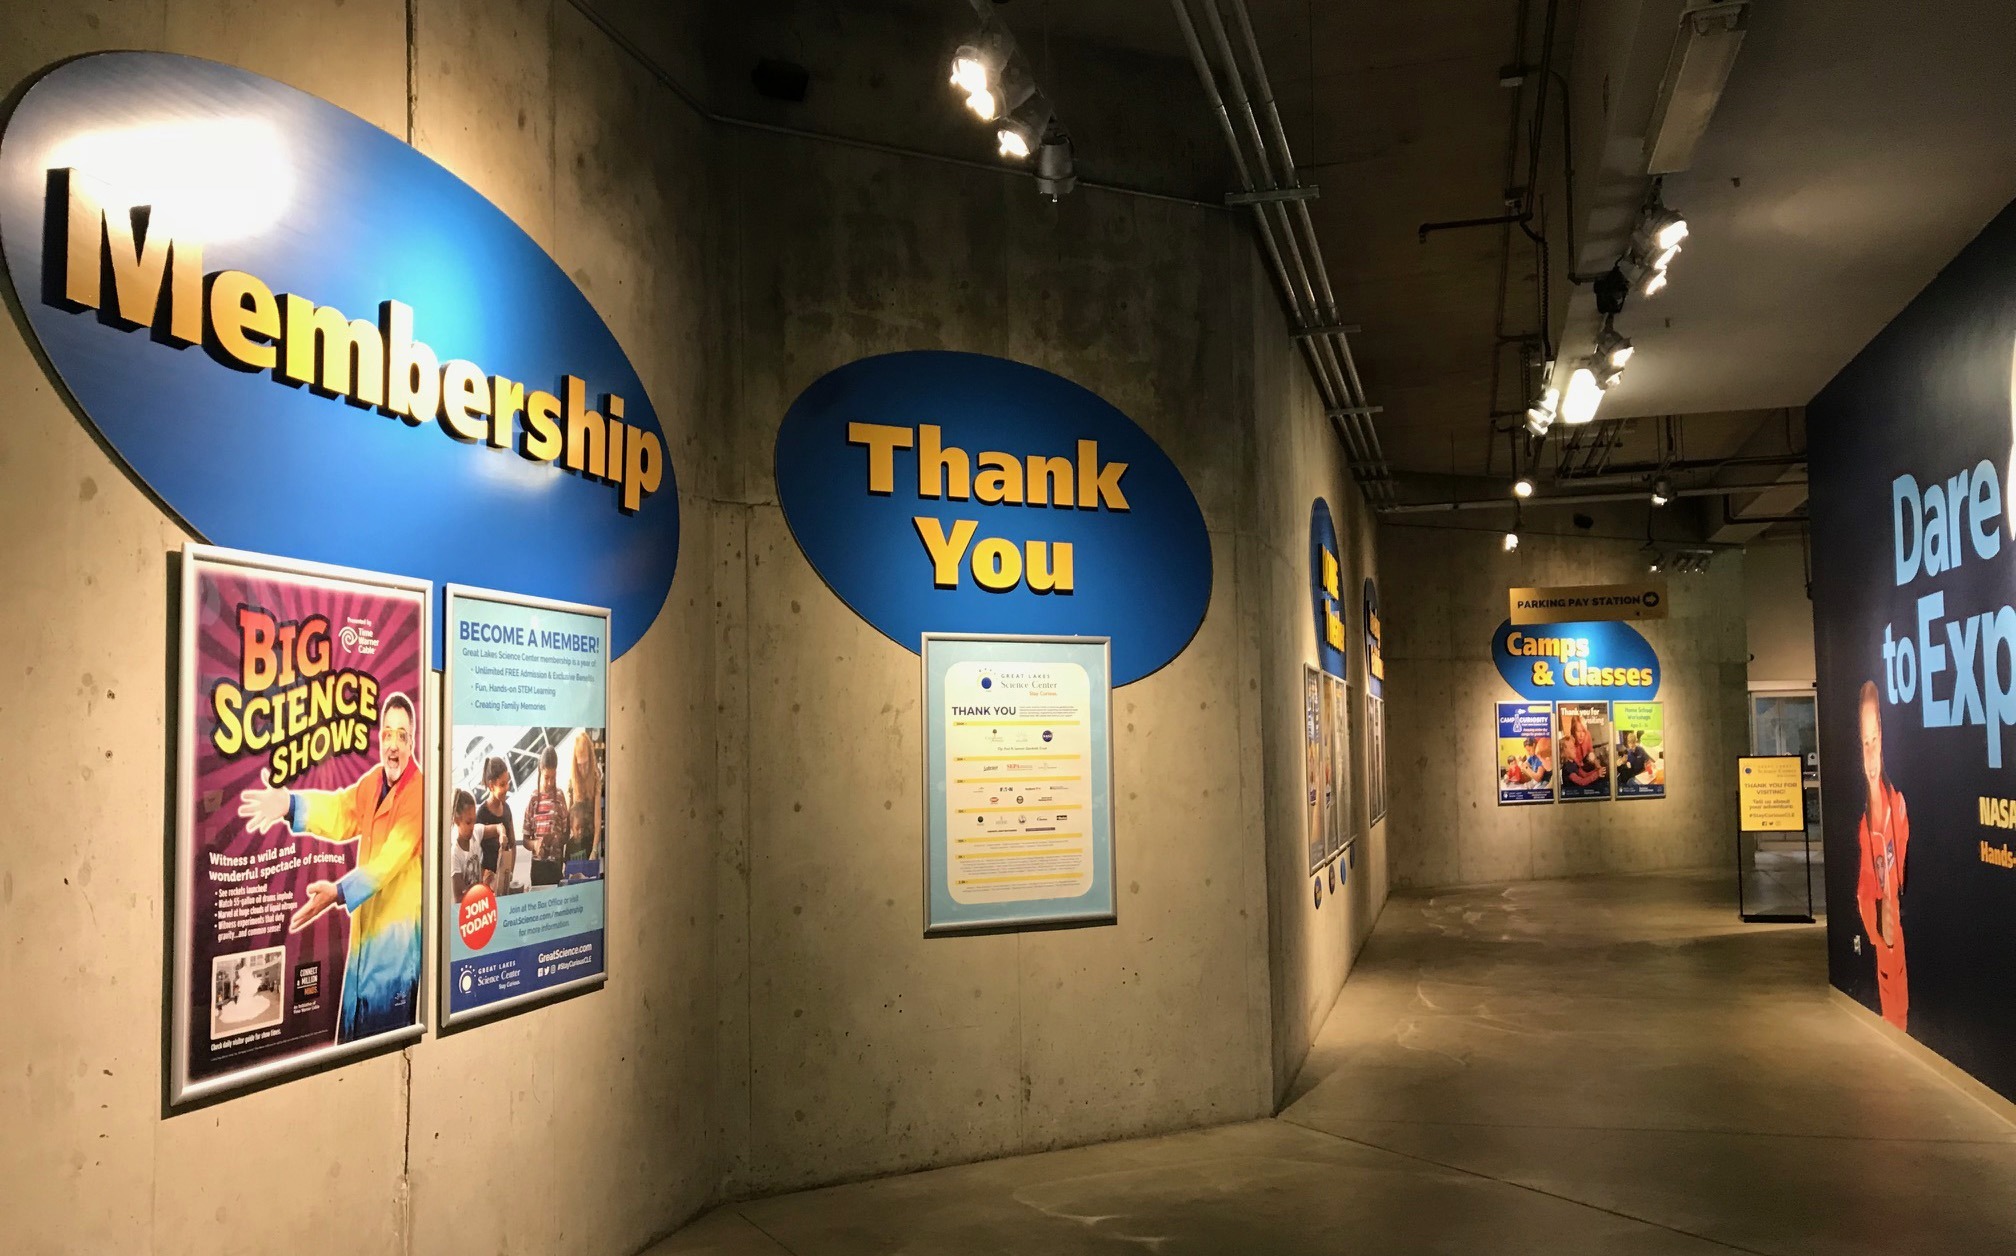 Cleveland Science Center Membership and Thank you signs in the hallways